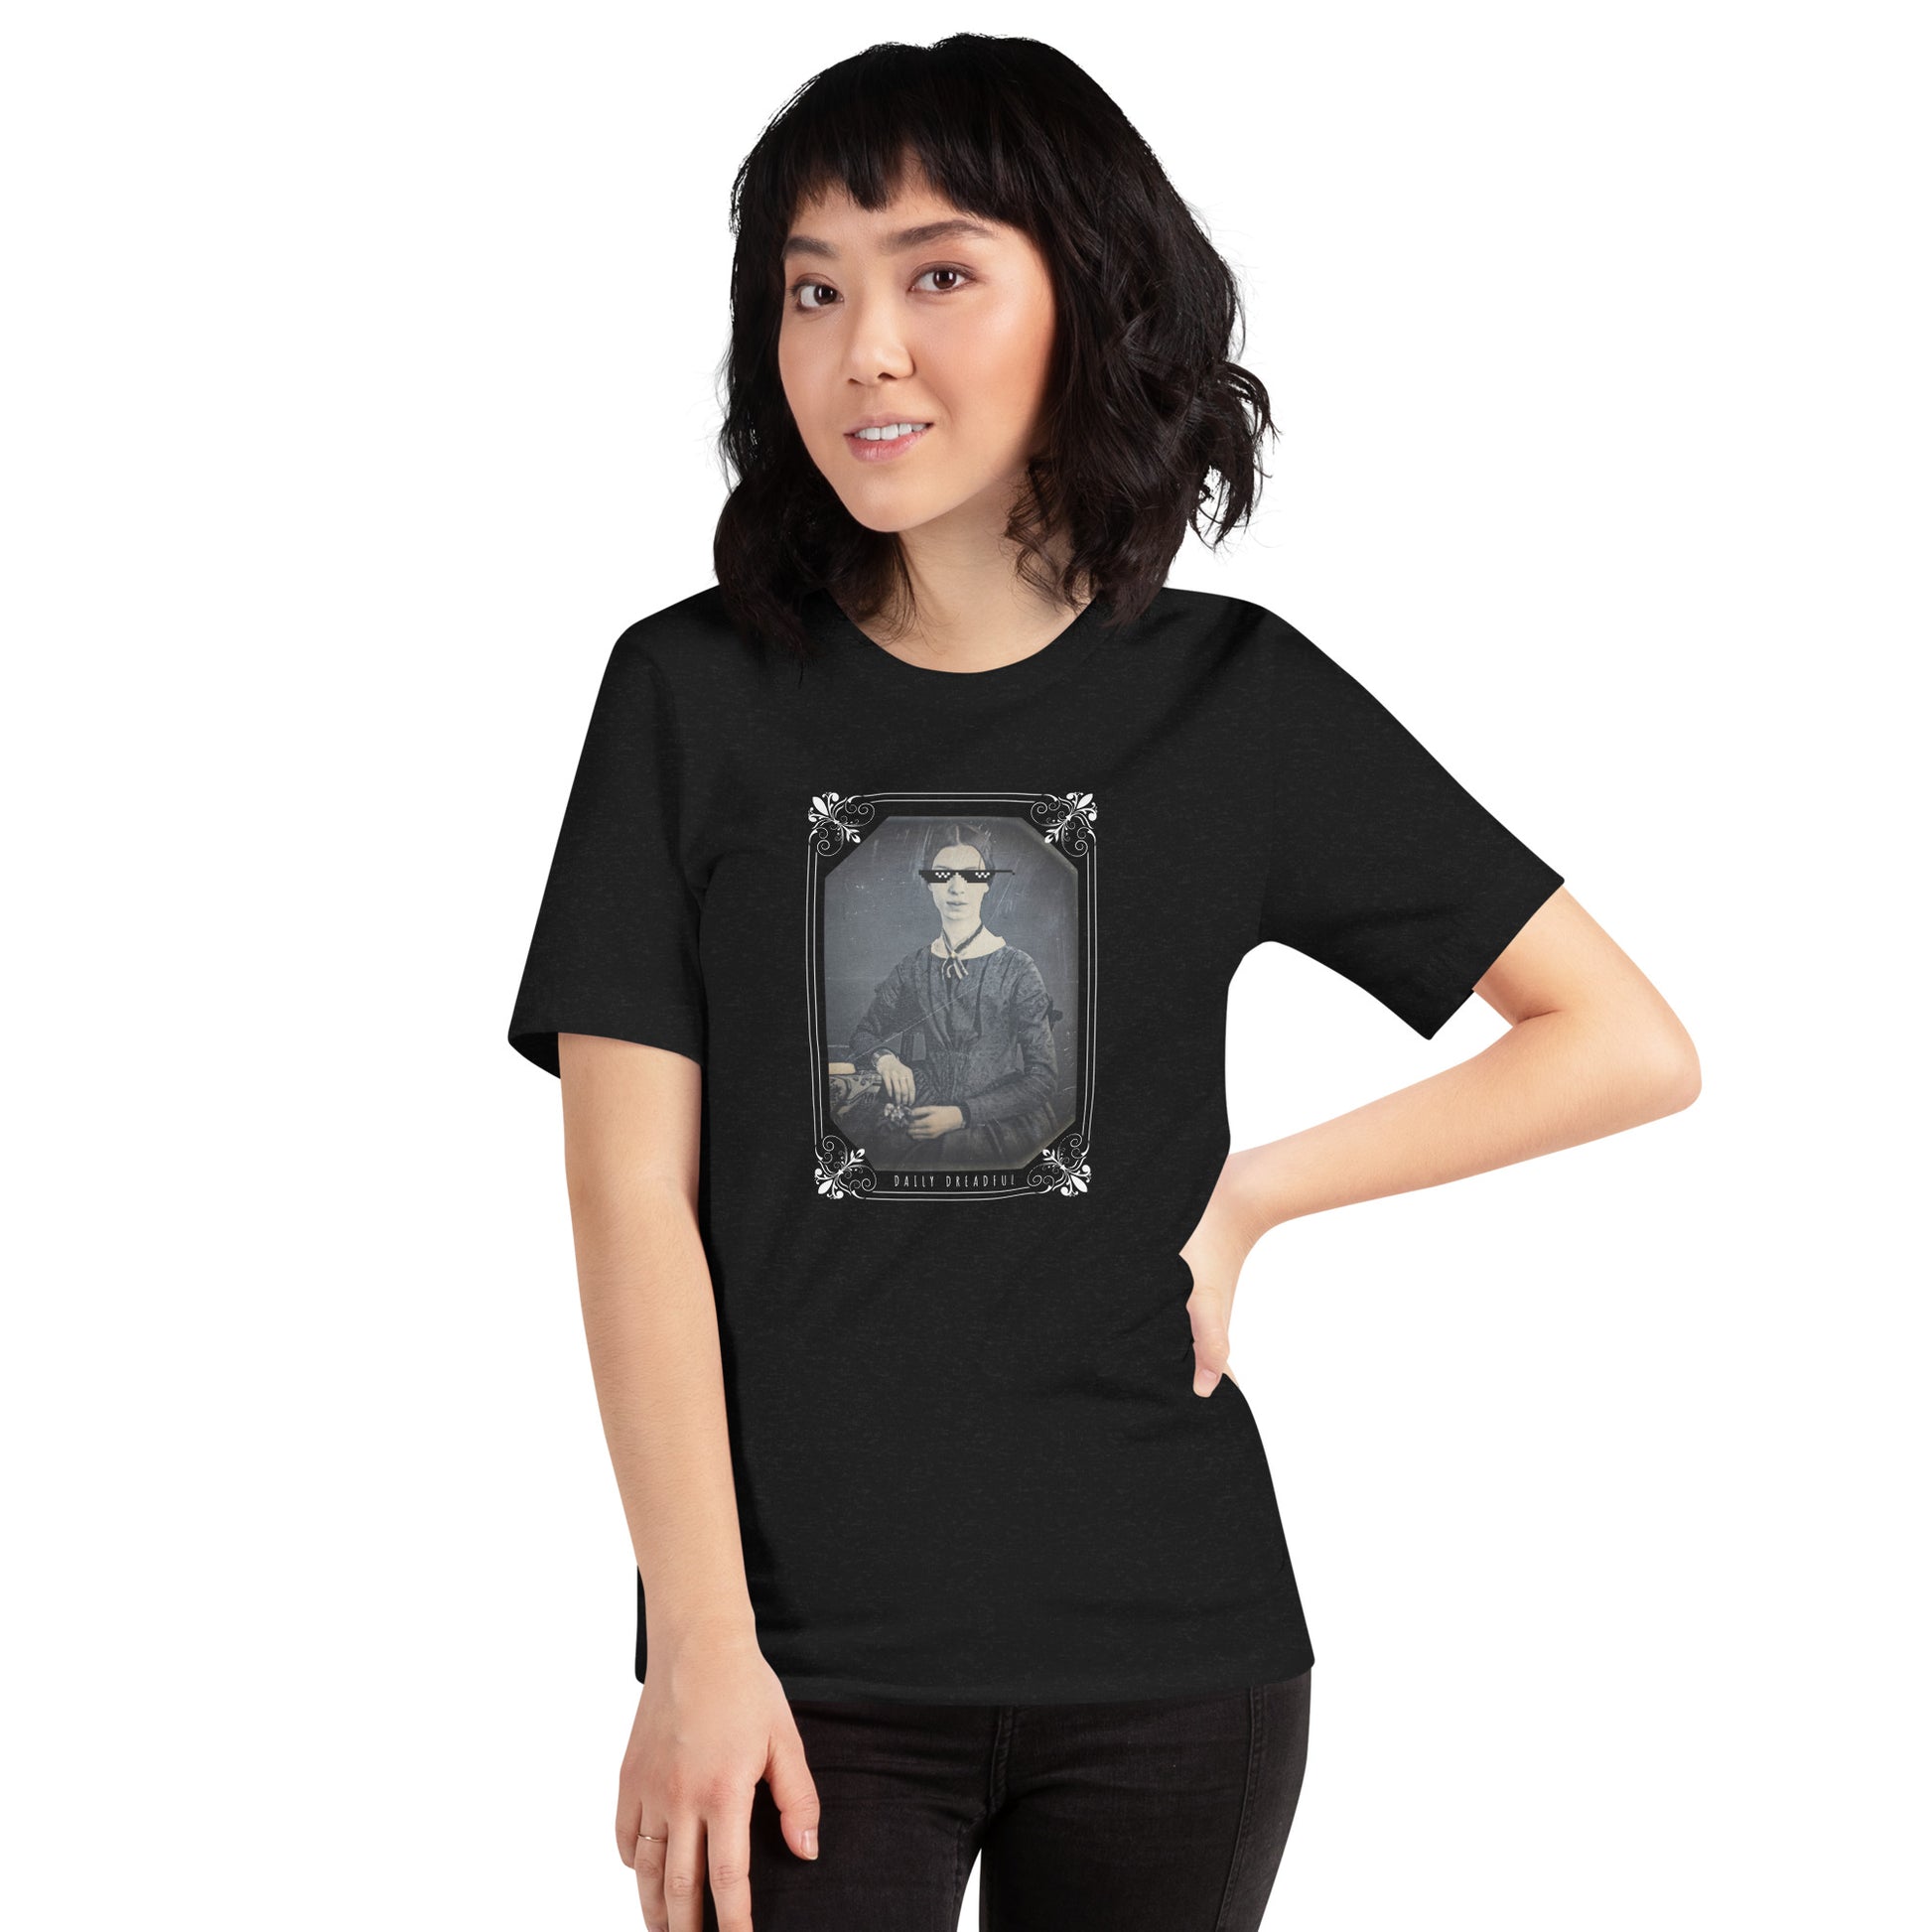 black heather "Thug Emily Dickinson" Unisex t-shirt from Daily Dreadful